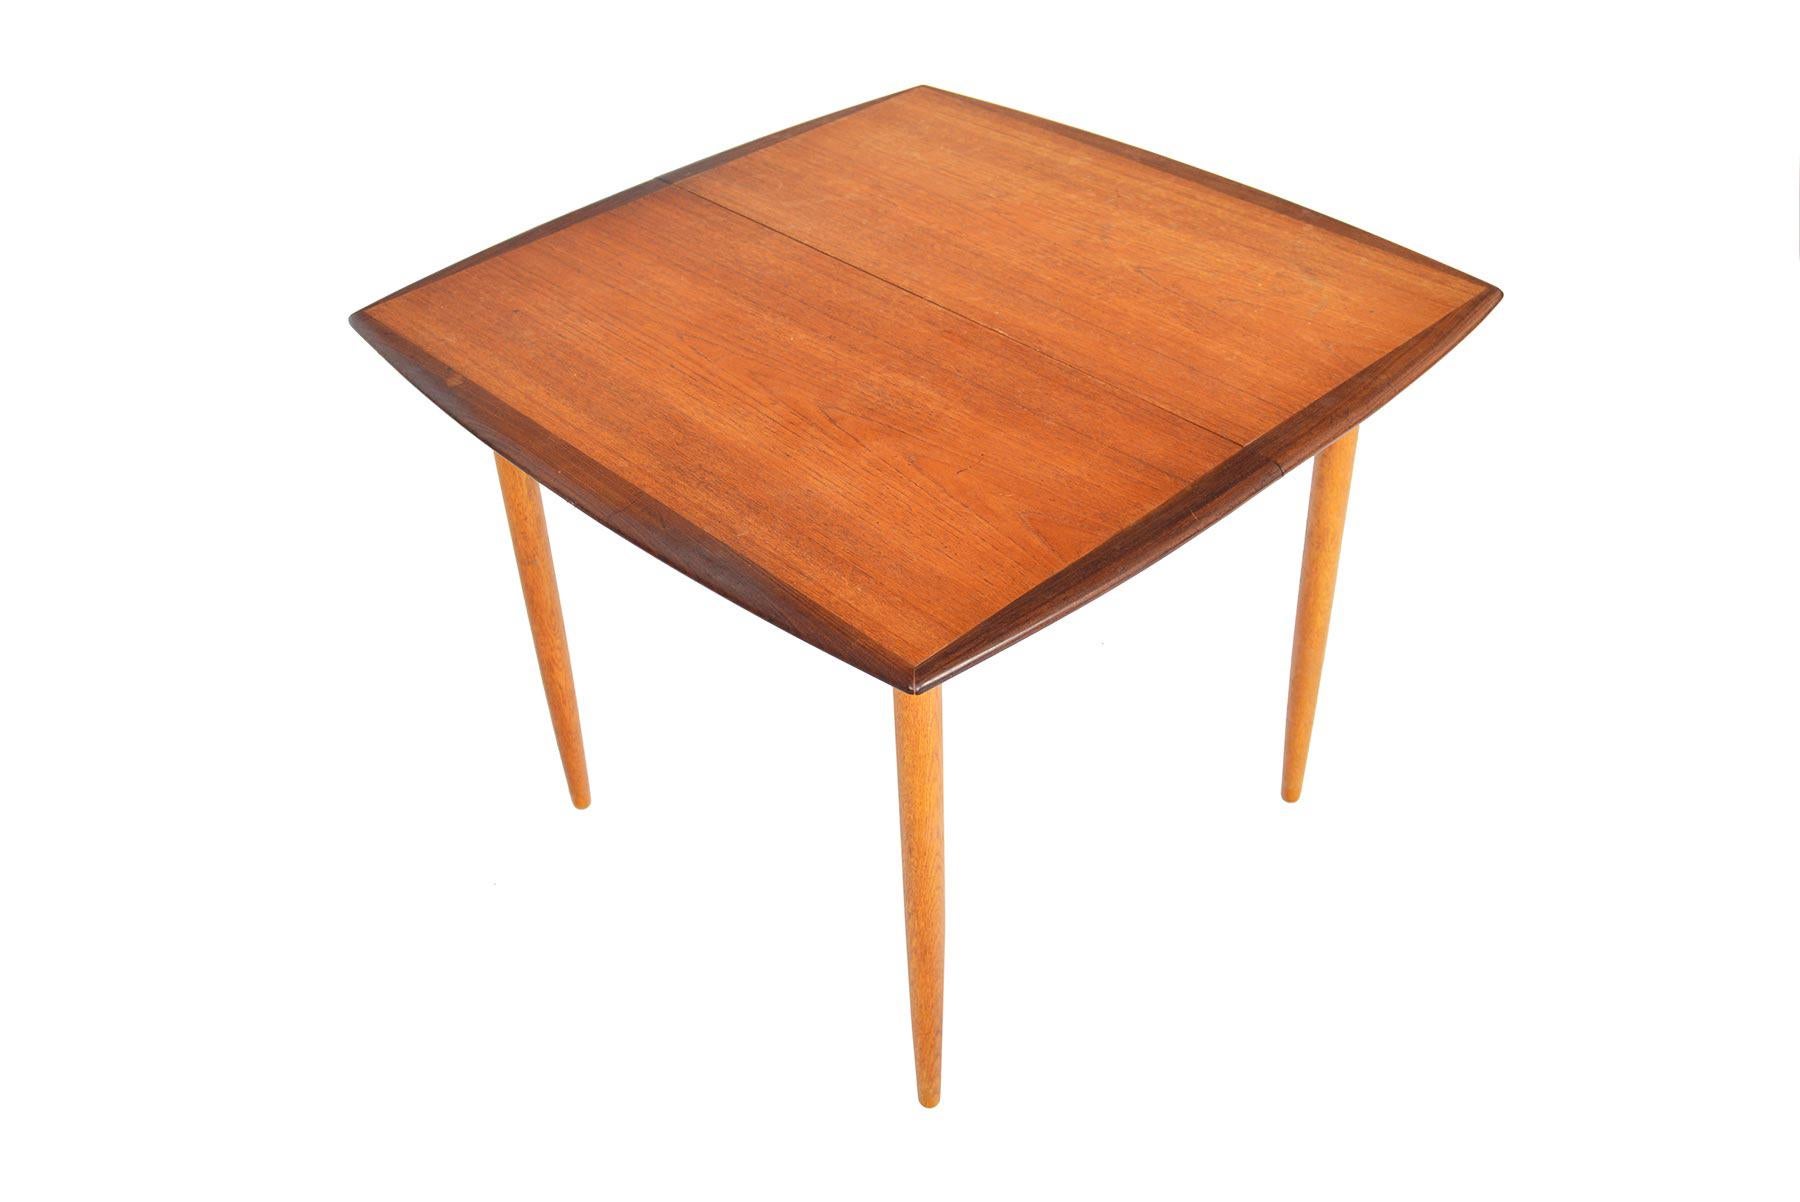 20th Century Square Teak and Oak Danish Modern Butterfly Leaf Midcentury Dining Table